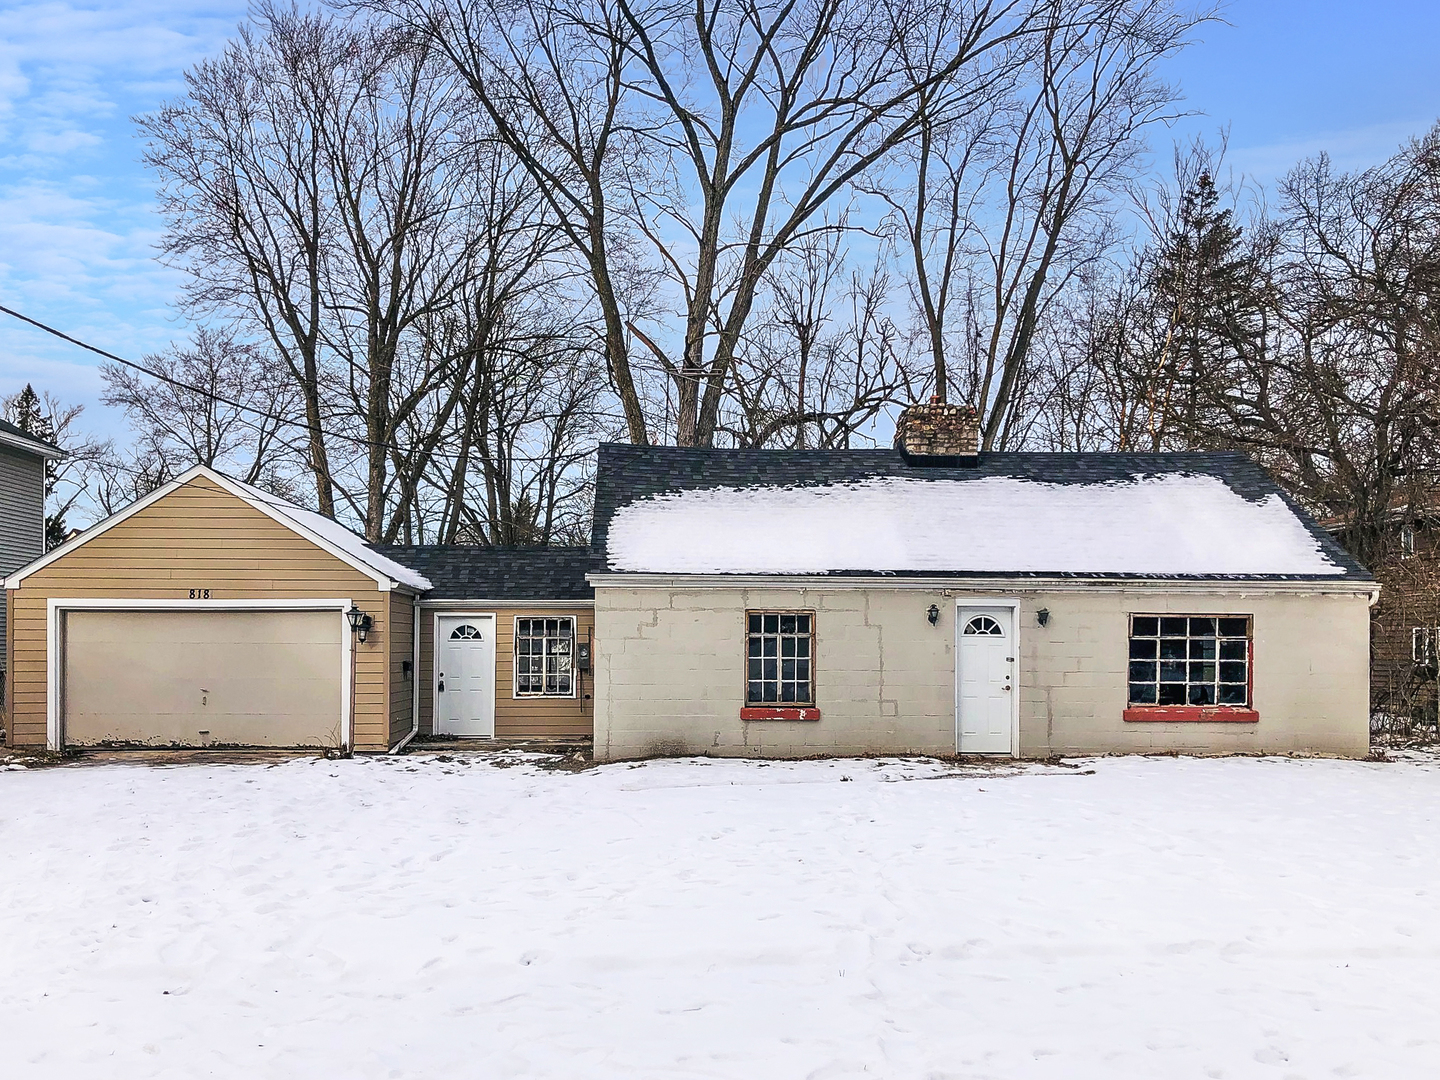 a front view of a house with a yard and covered with snow